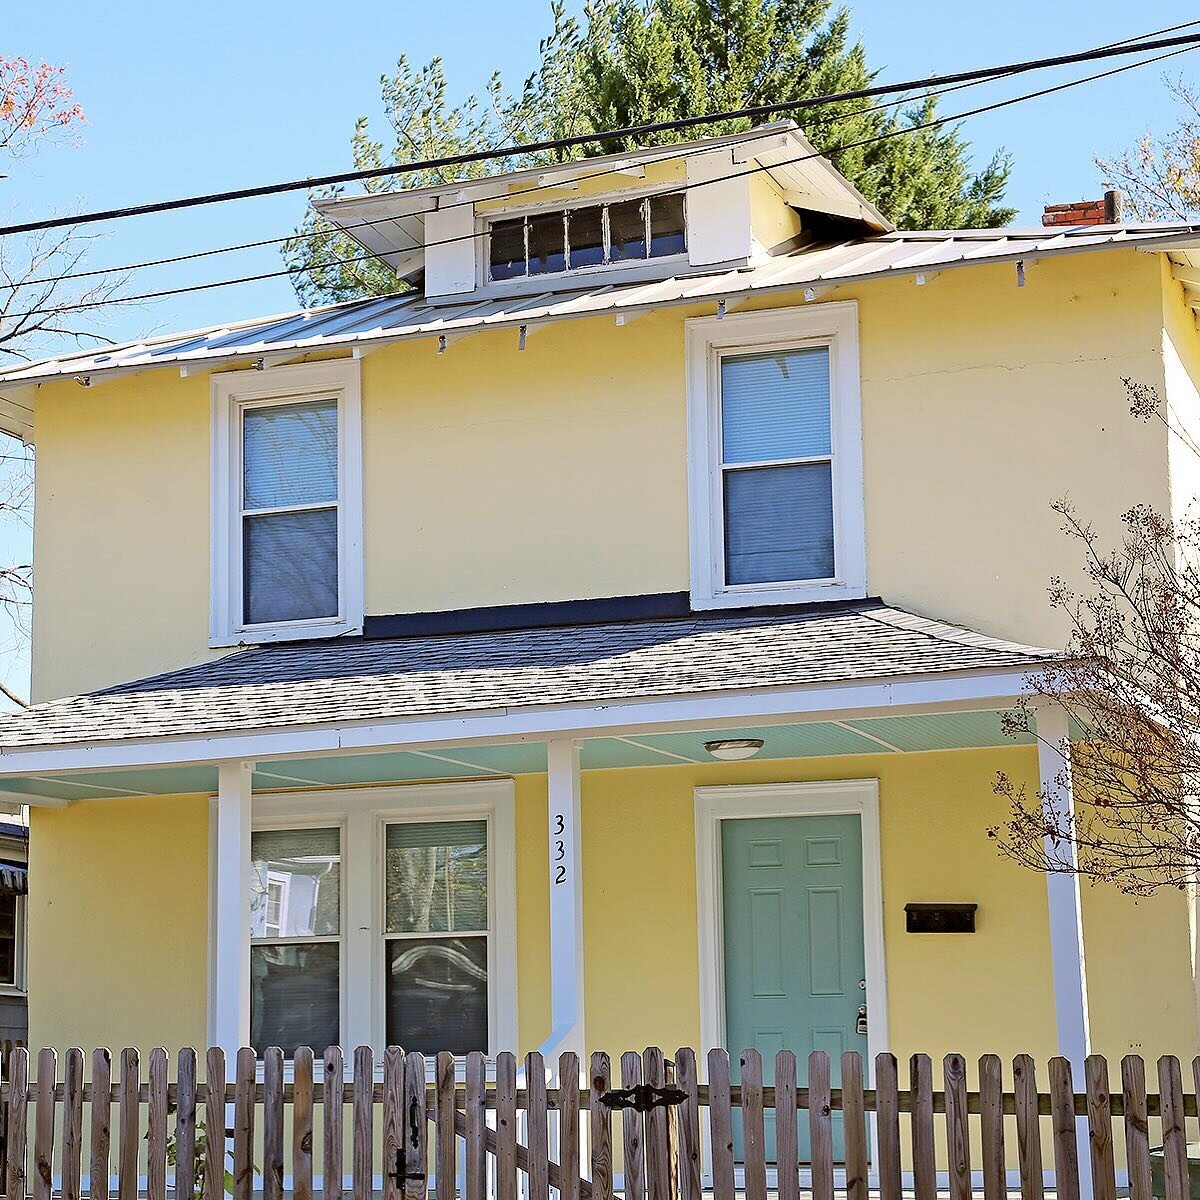 Move-in ready and available for rent! 🏡 Located in the heart of Charlottesville, this charming 3 bedroom, 2 bath home is nestled between the University of Virginia and downtown. 

Built in the 1920s, this 1,344sqft stucco home offers a light-filled 